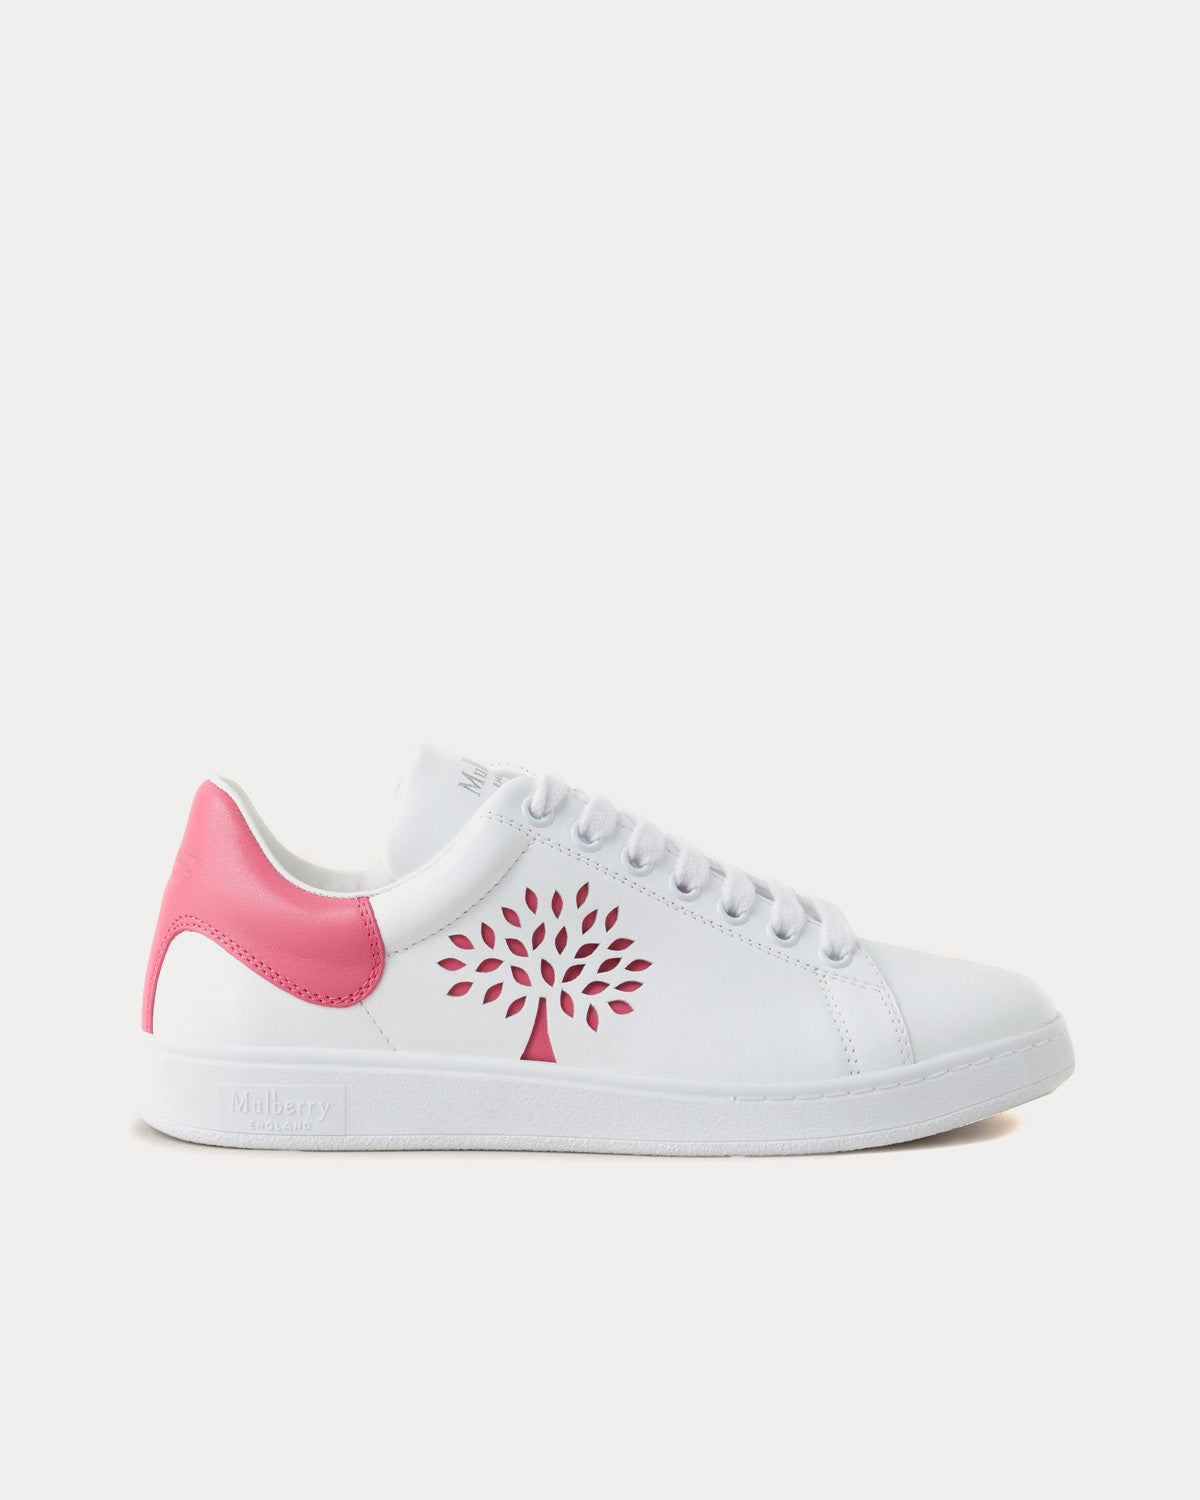 Mulberry - Tree Tennis Bovine Leather Geranium Pink Low Top Sneakers